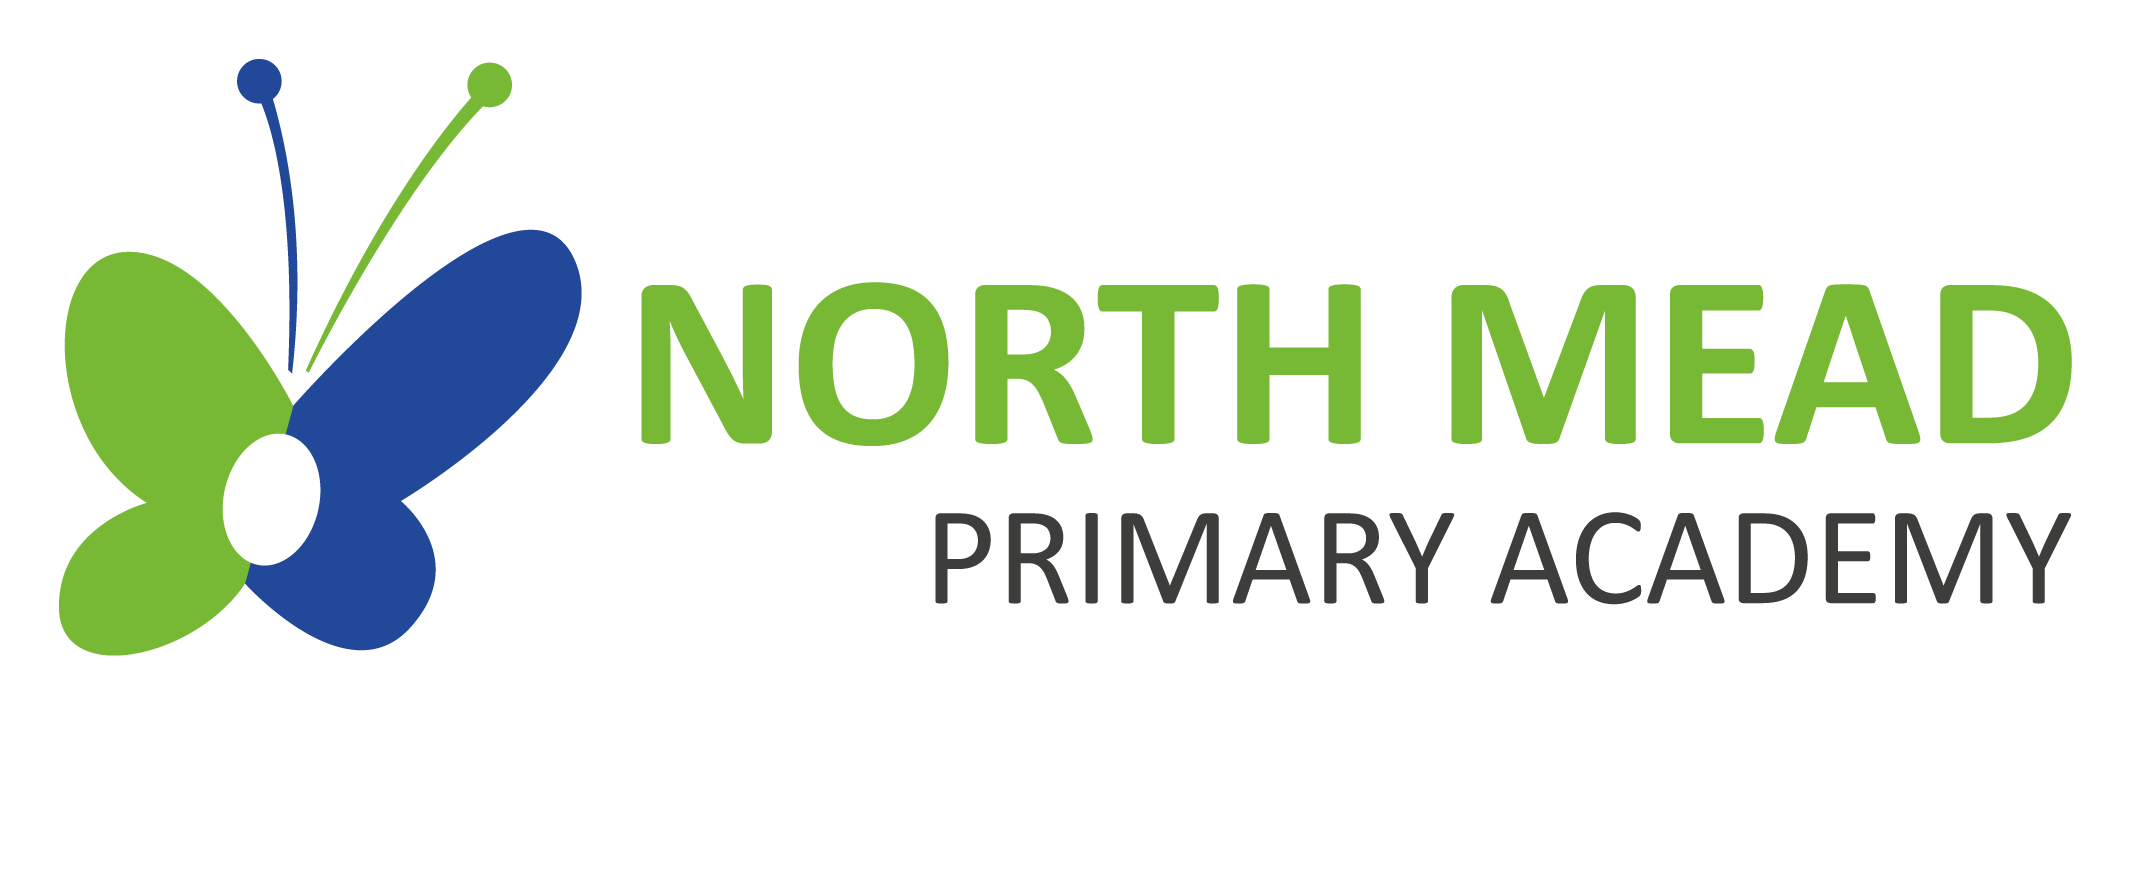 North Mead Primary Academy | TMET Leicester MAT Logo